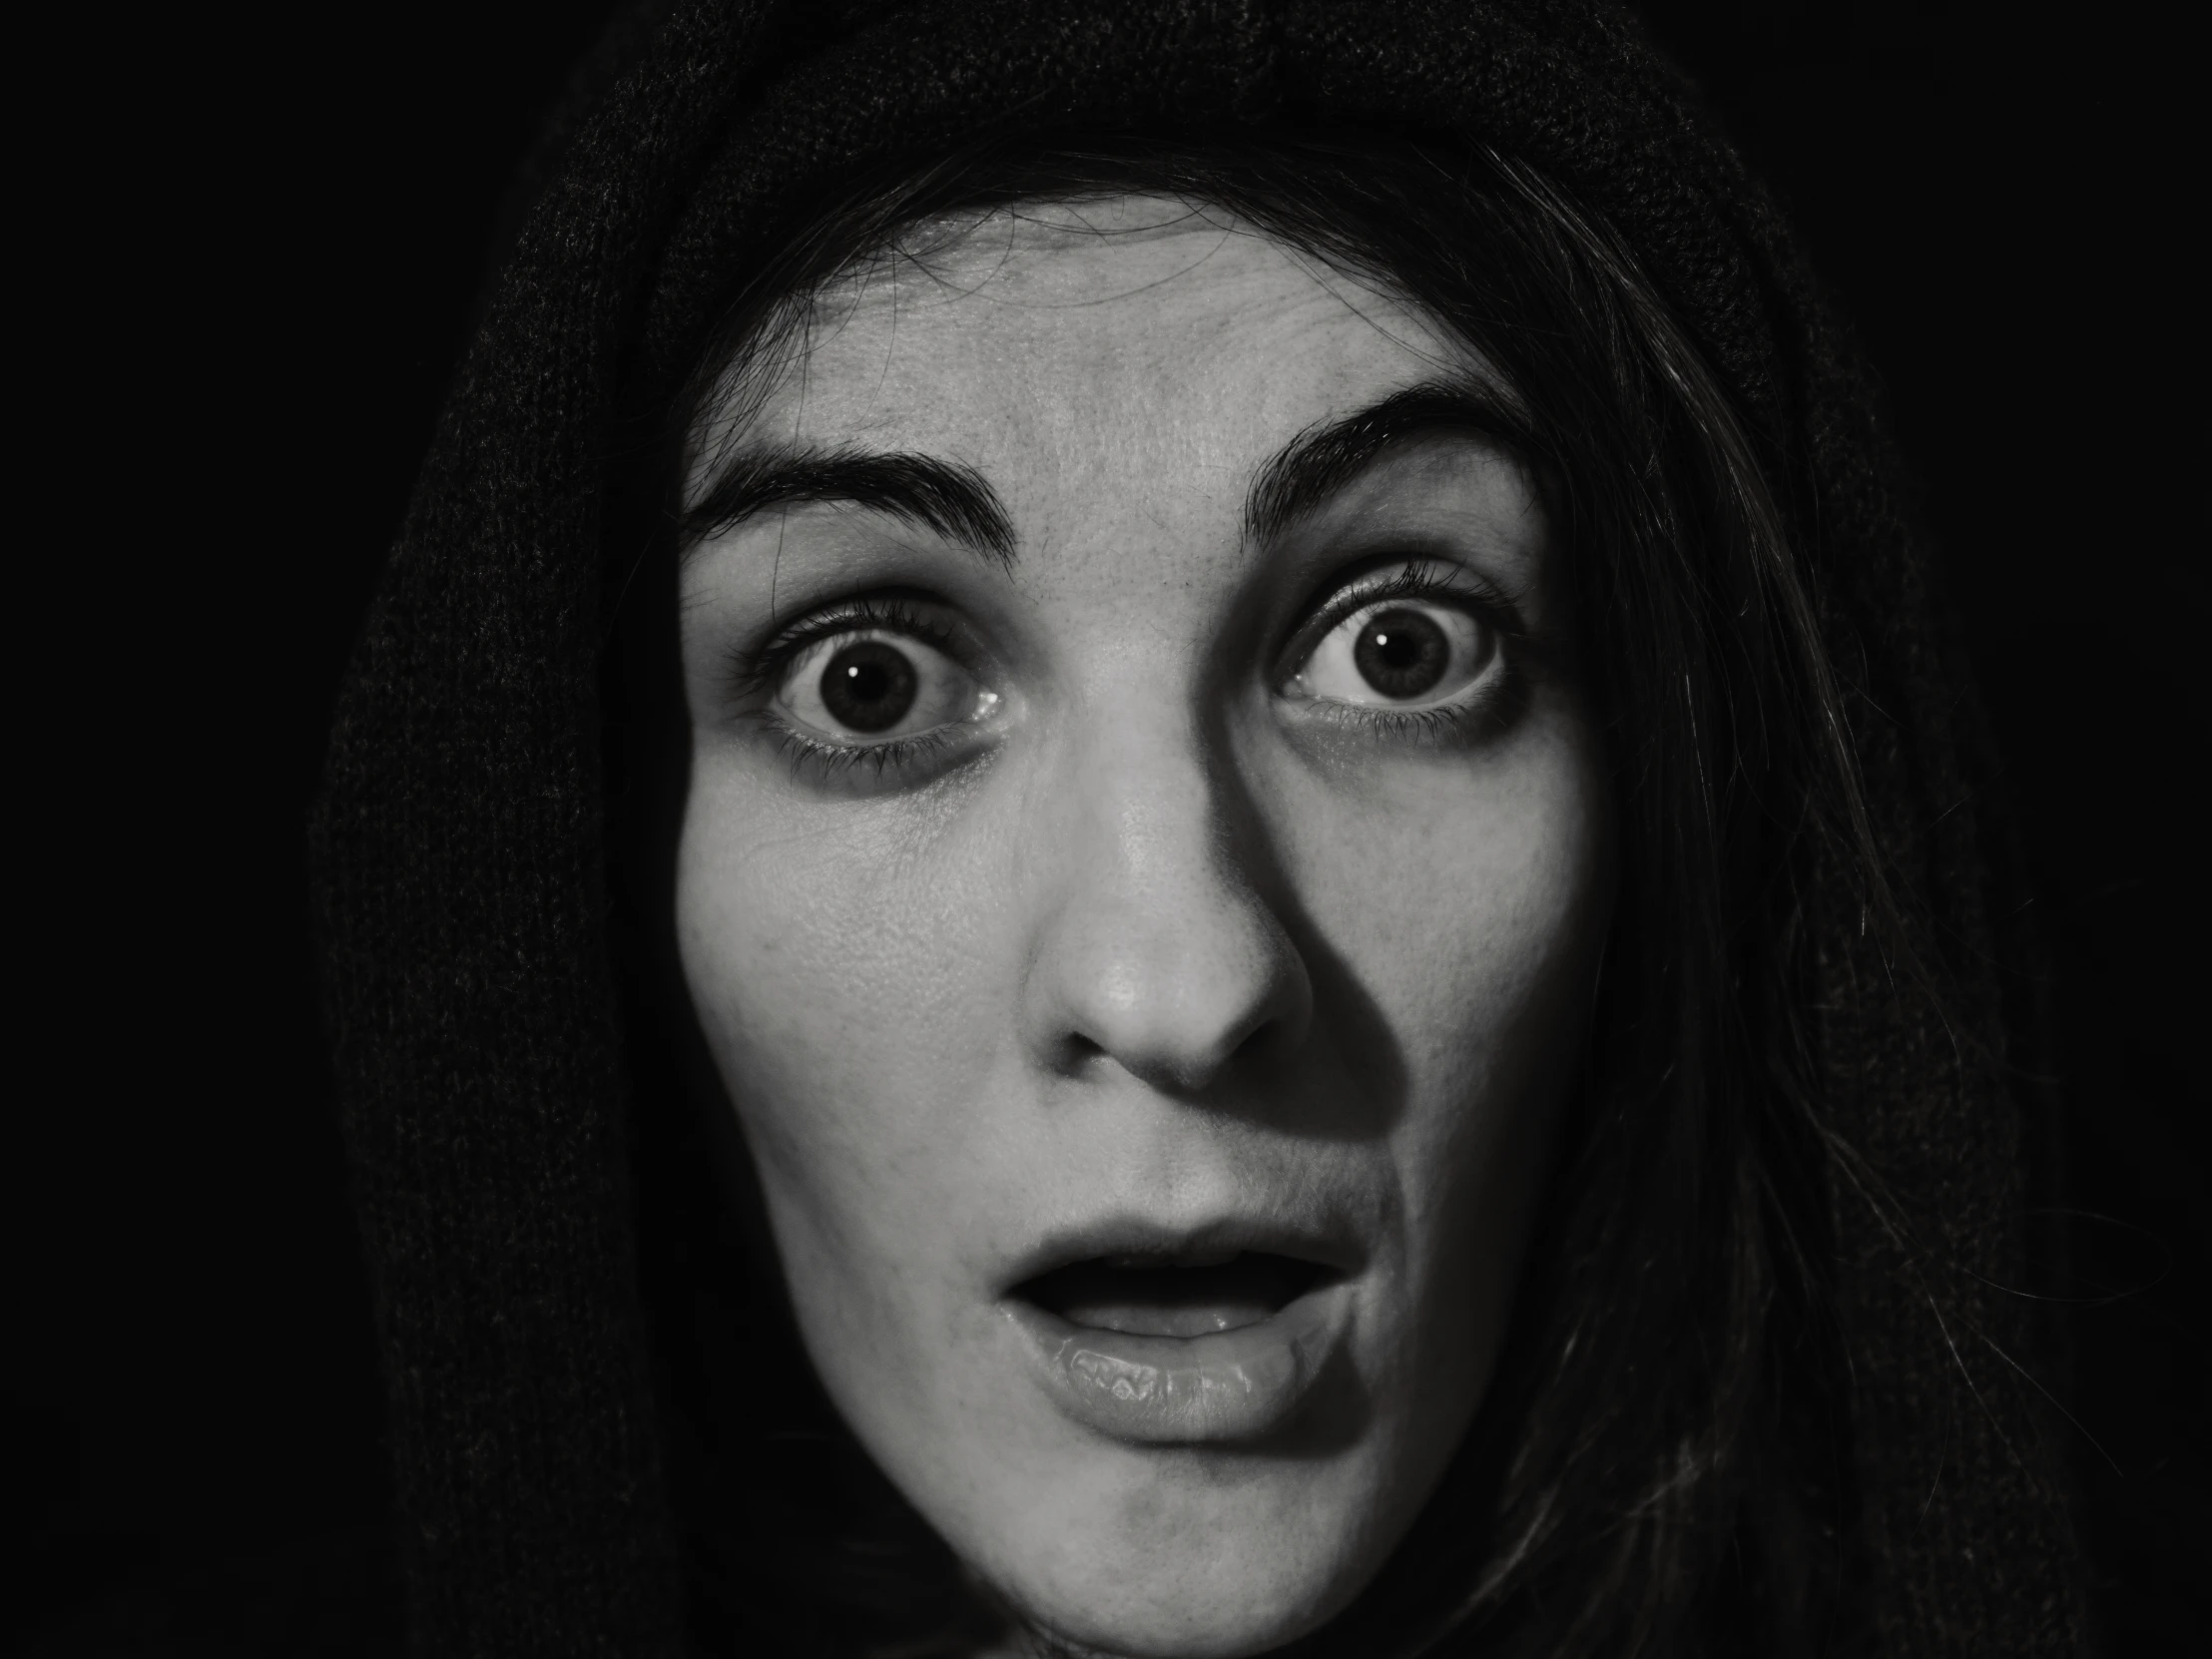 a black and white po shows the face of a woman